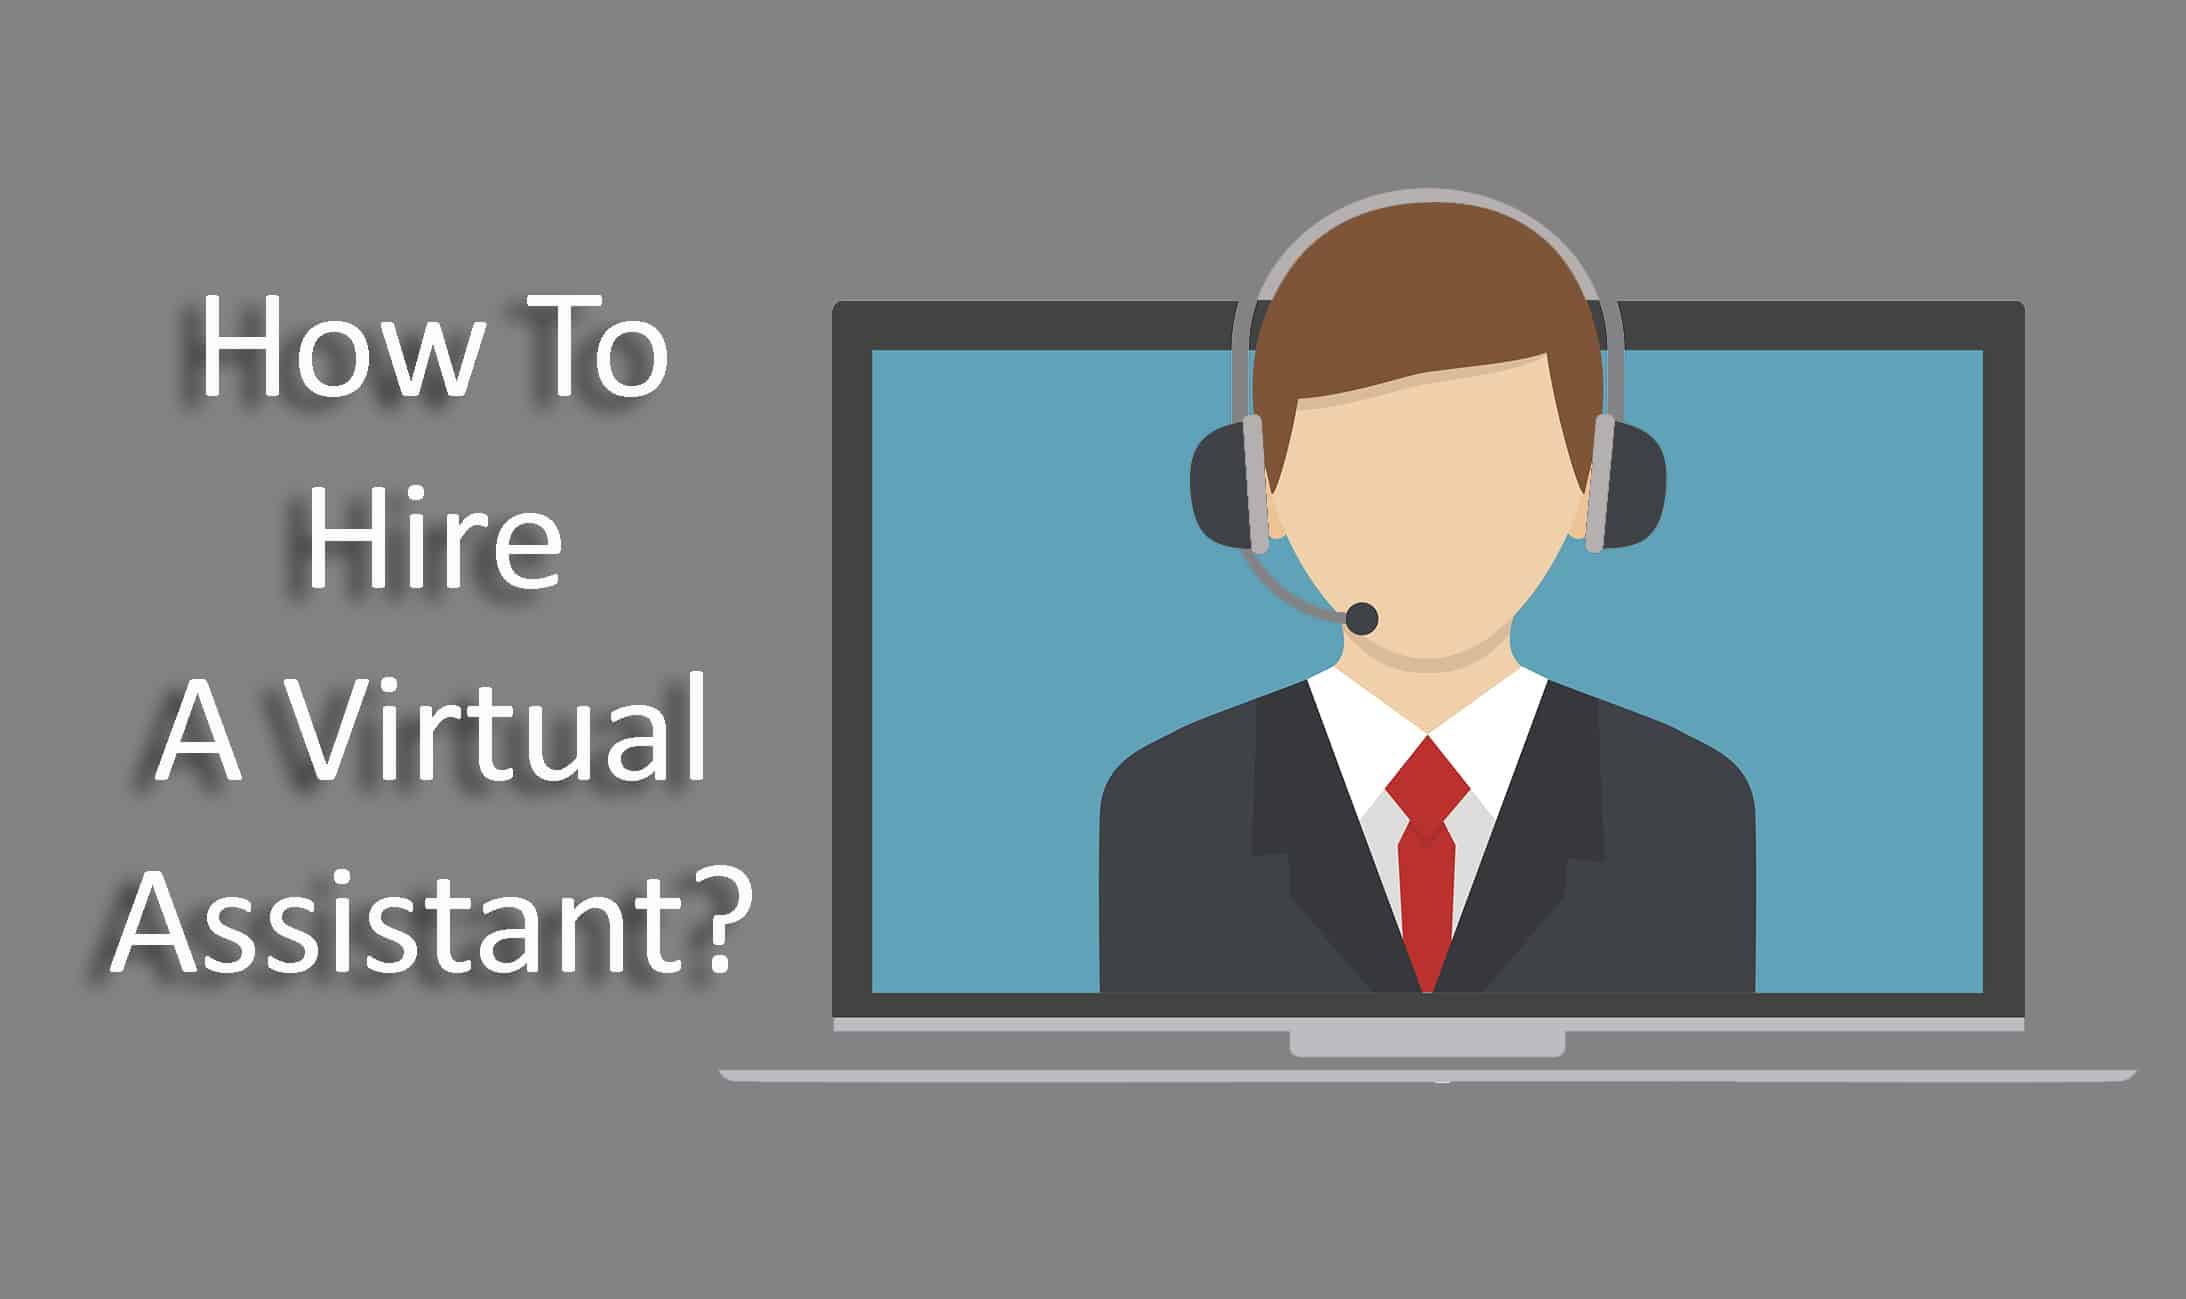 A Financial Advisor’s Guide to Hiring a Virtual Assistant